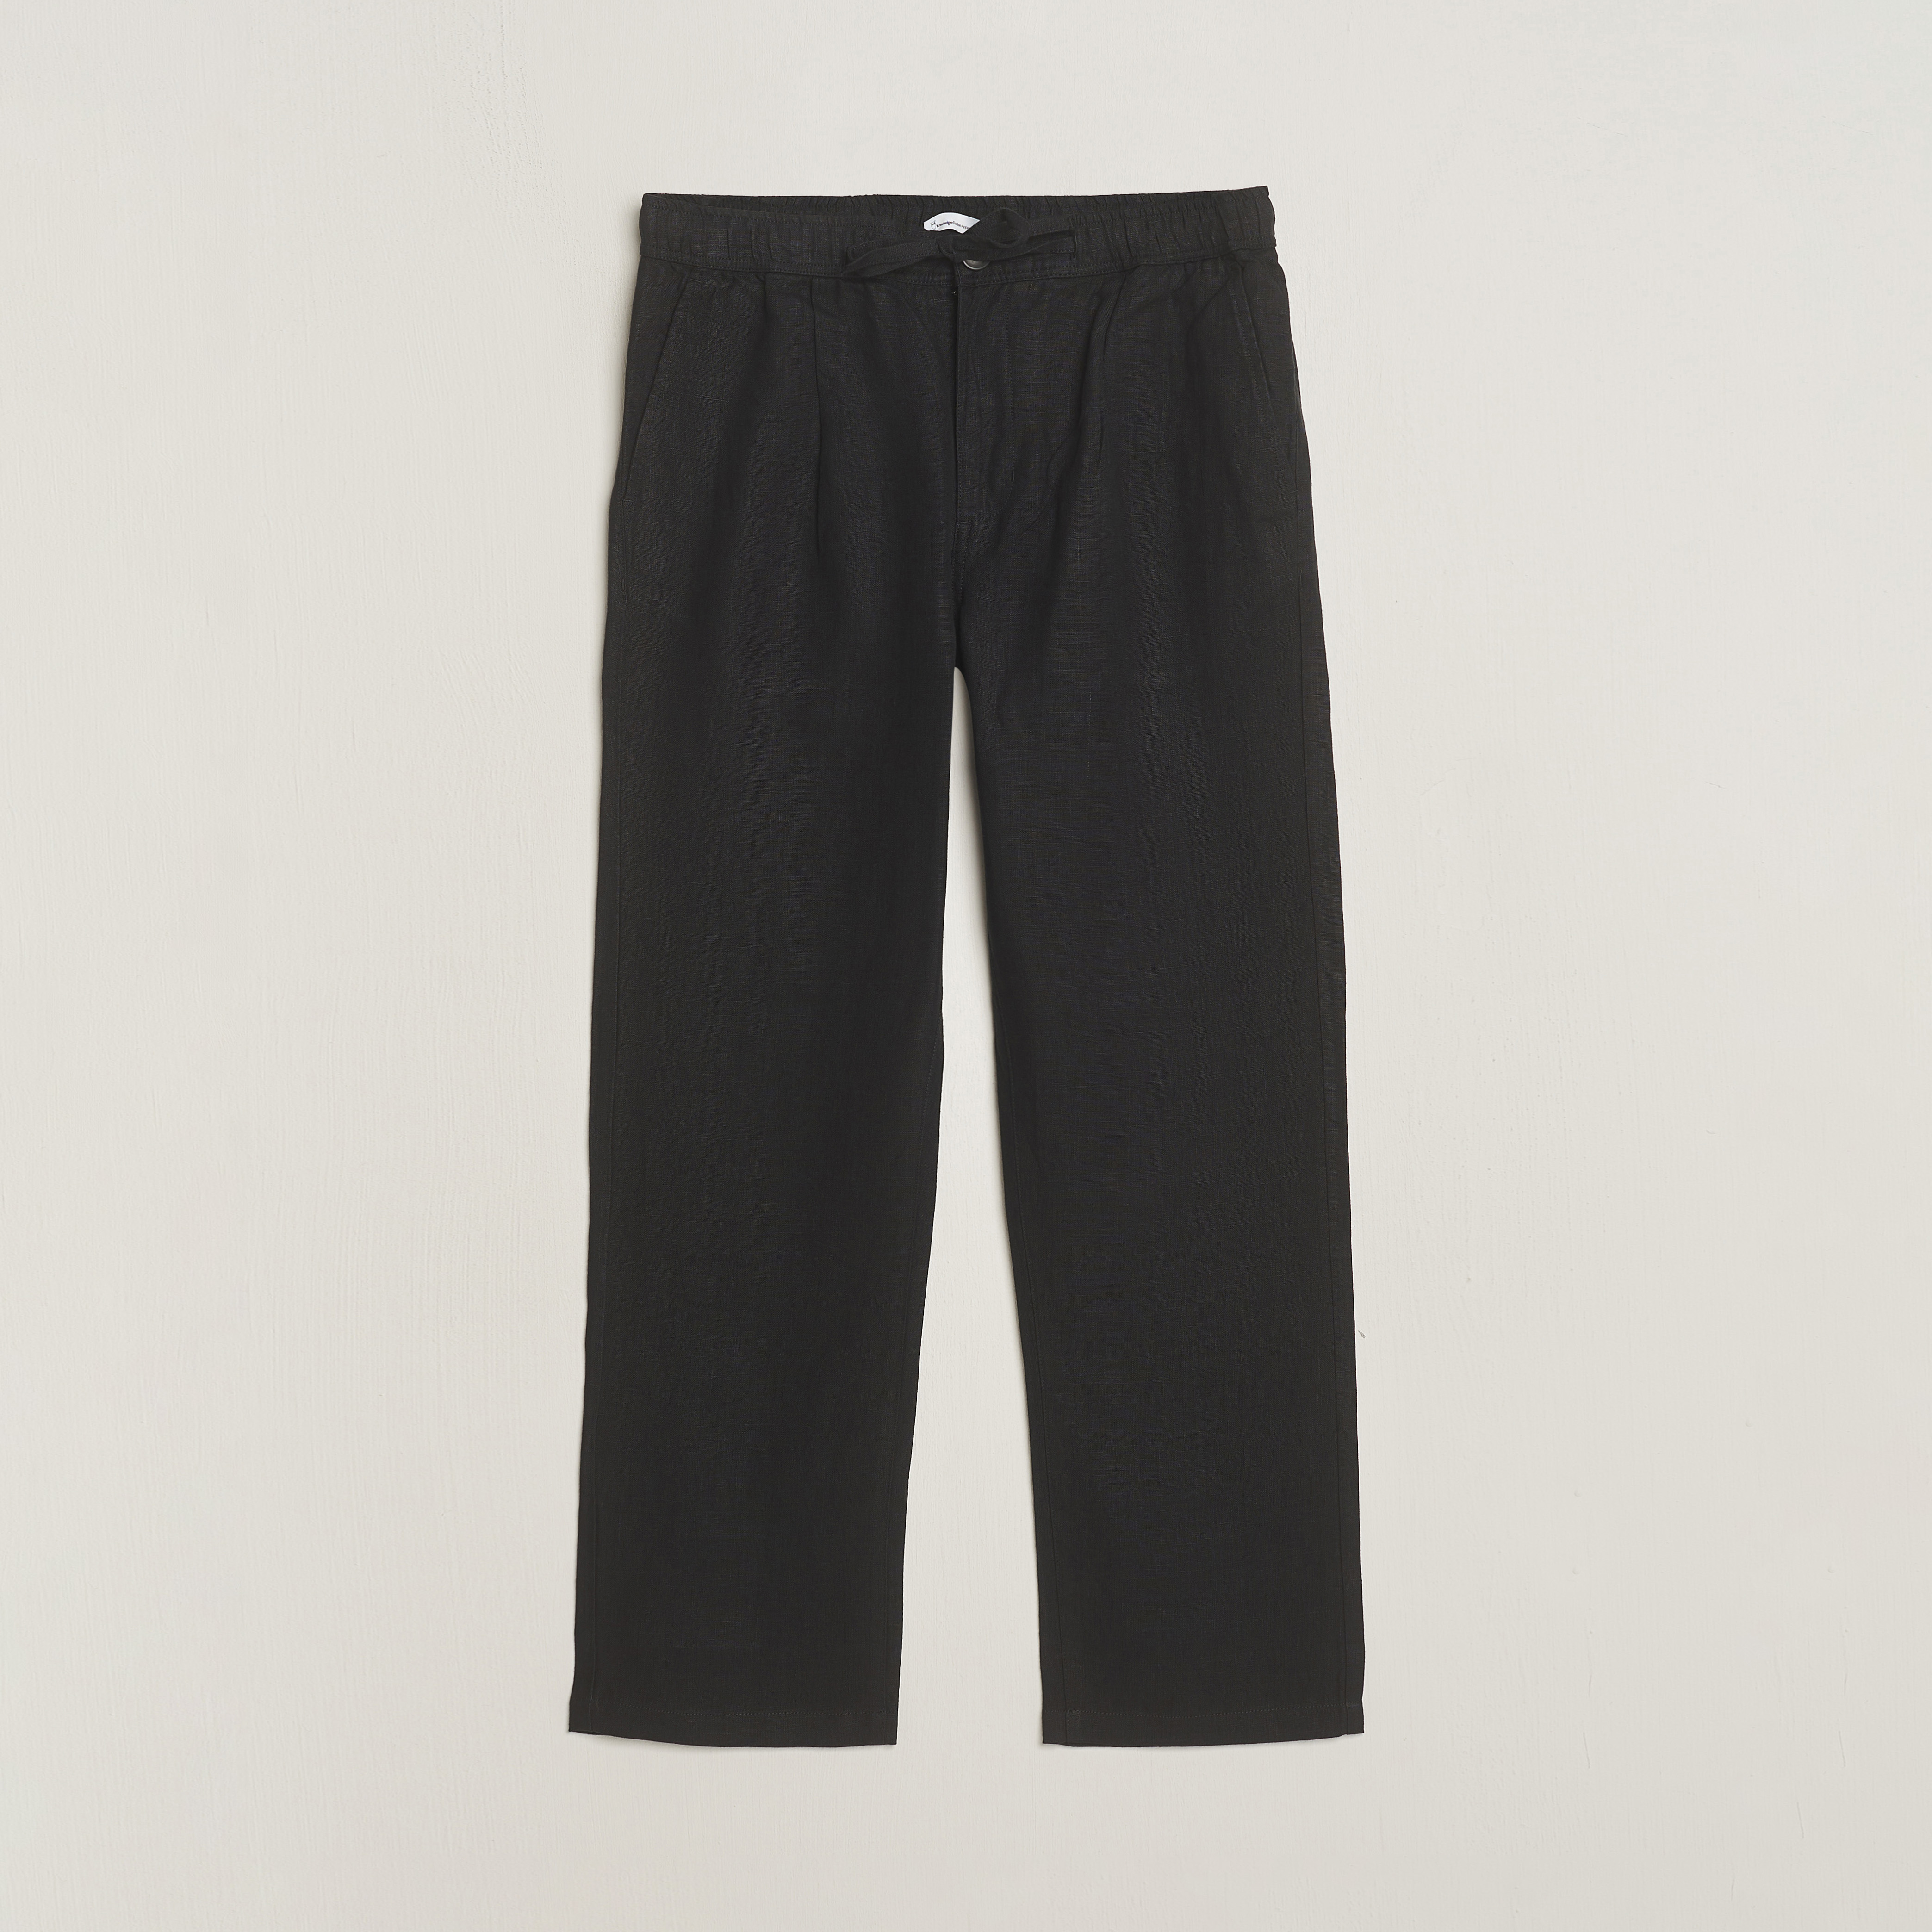 Buy Loose linen pant - Black Jet - from KnowledgeCotton Apparel®